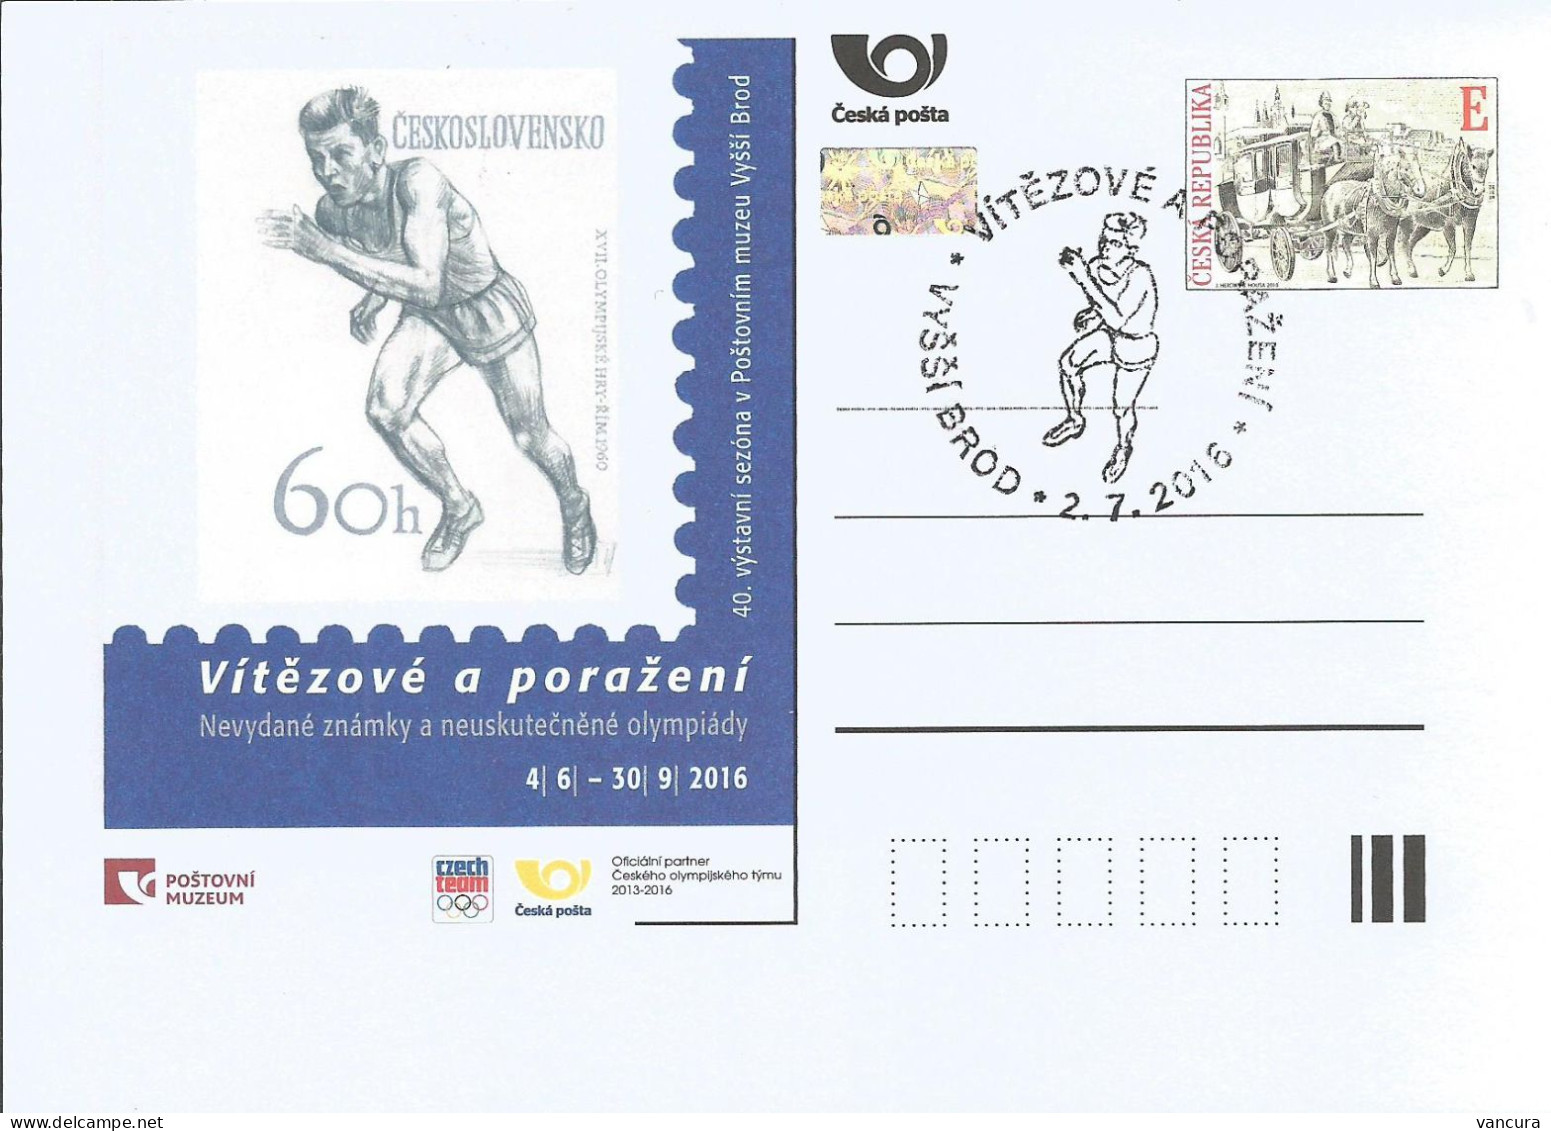 CDV PM 112 Czech Republic Exhibition In Post Museum In Vyssi Brod/Hohenfurth - Unissued Designs Of Olympic Stamps 2016 - Summer 1960: Rome